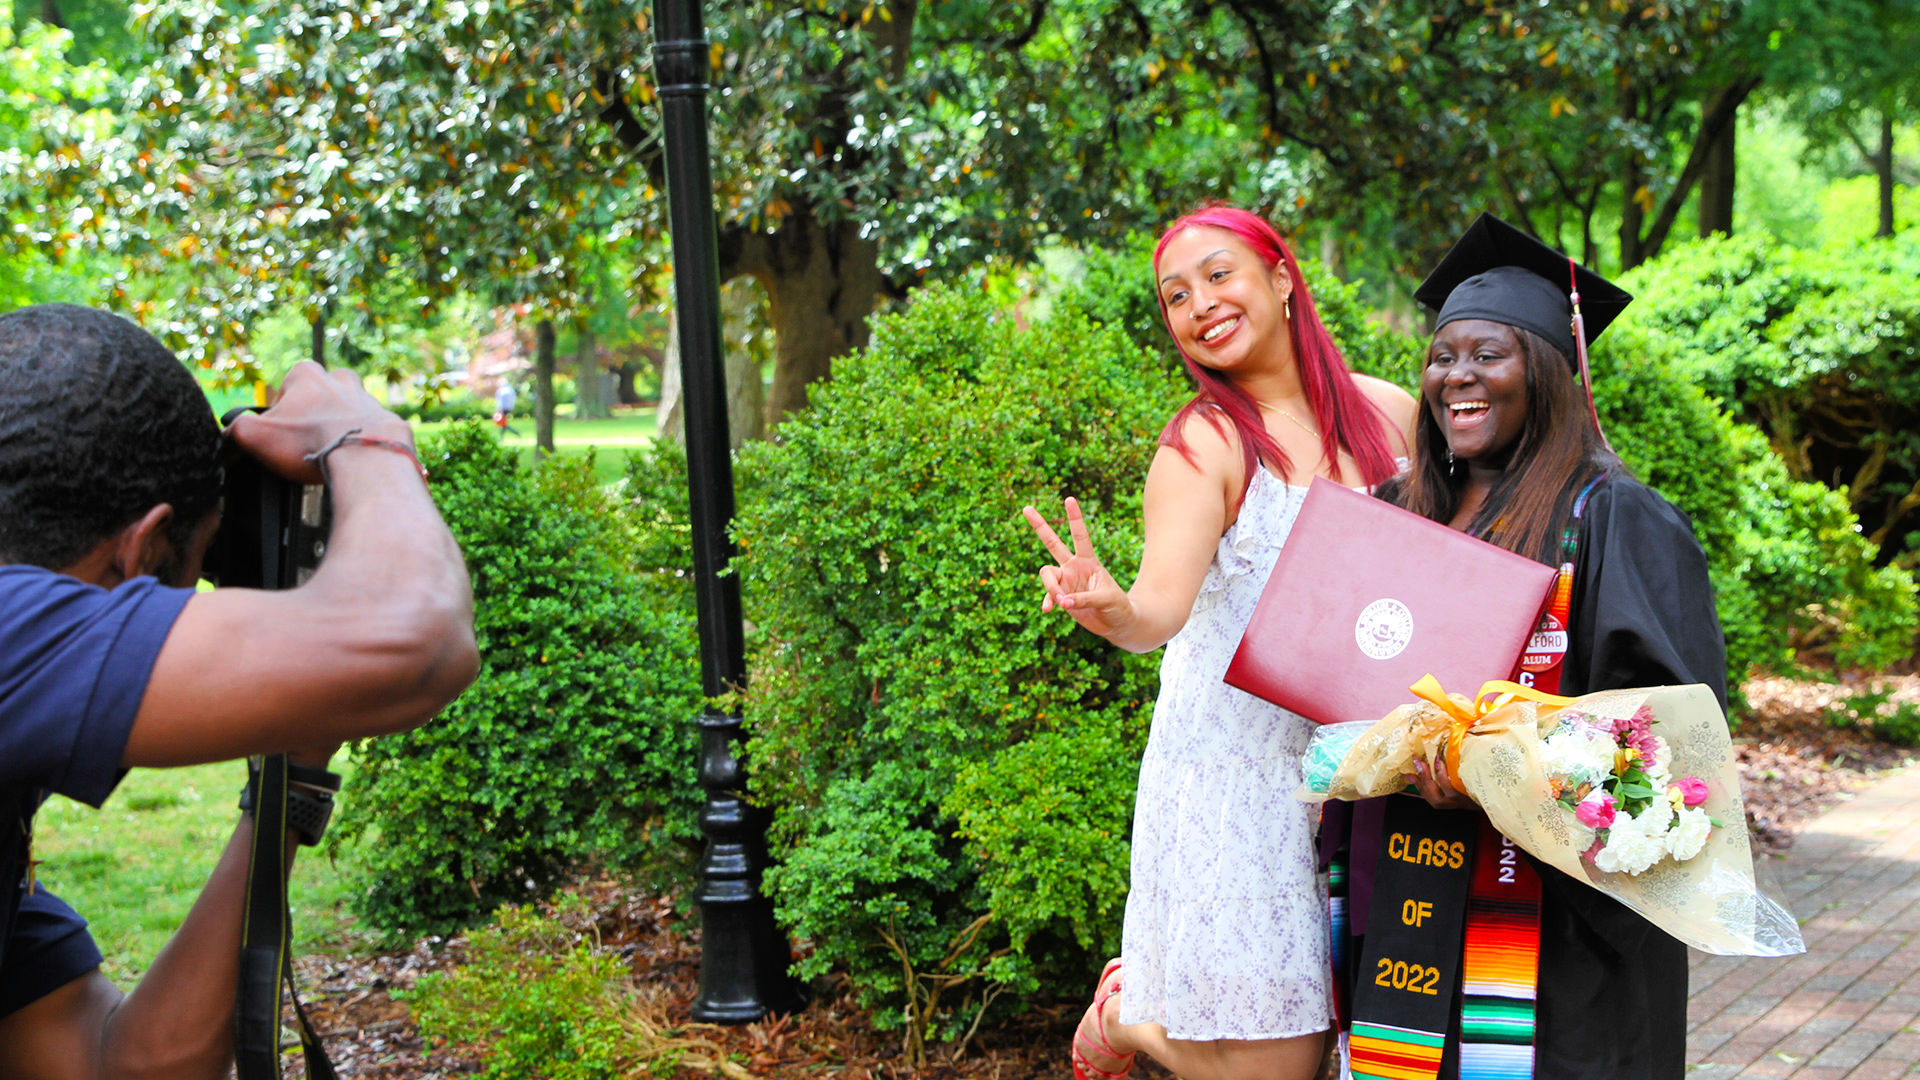 A friend takes a photo with a graduate wearing a graduation cap and gown outdoors after Commencement.